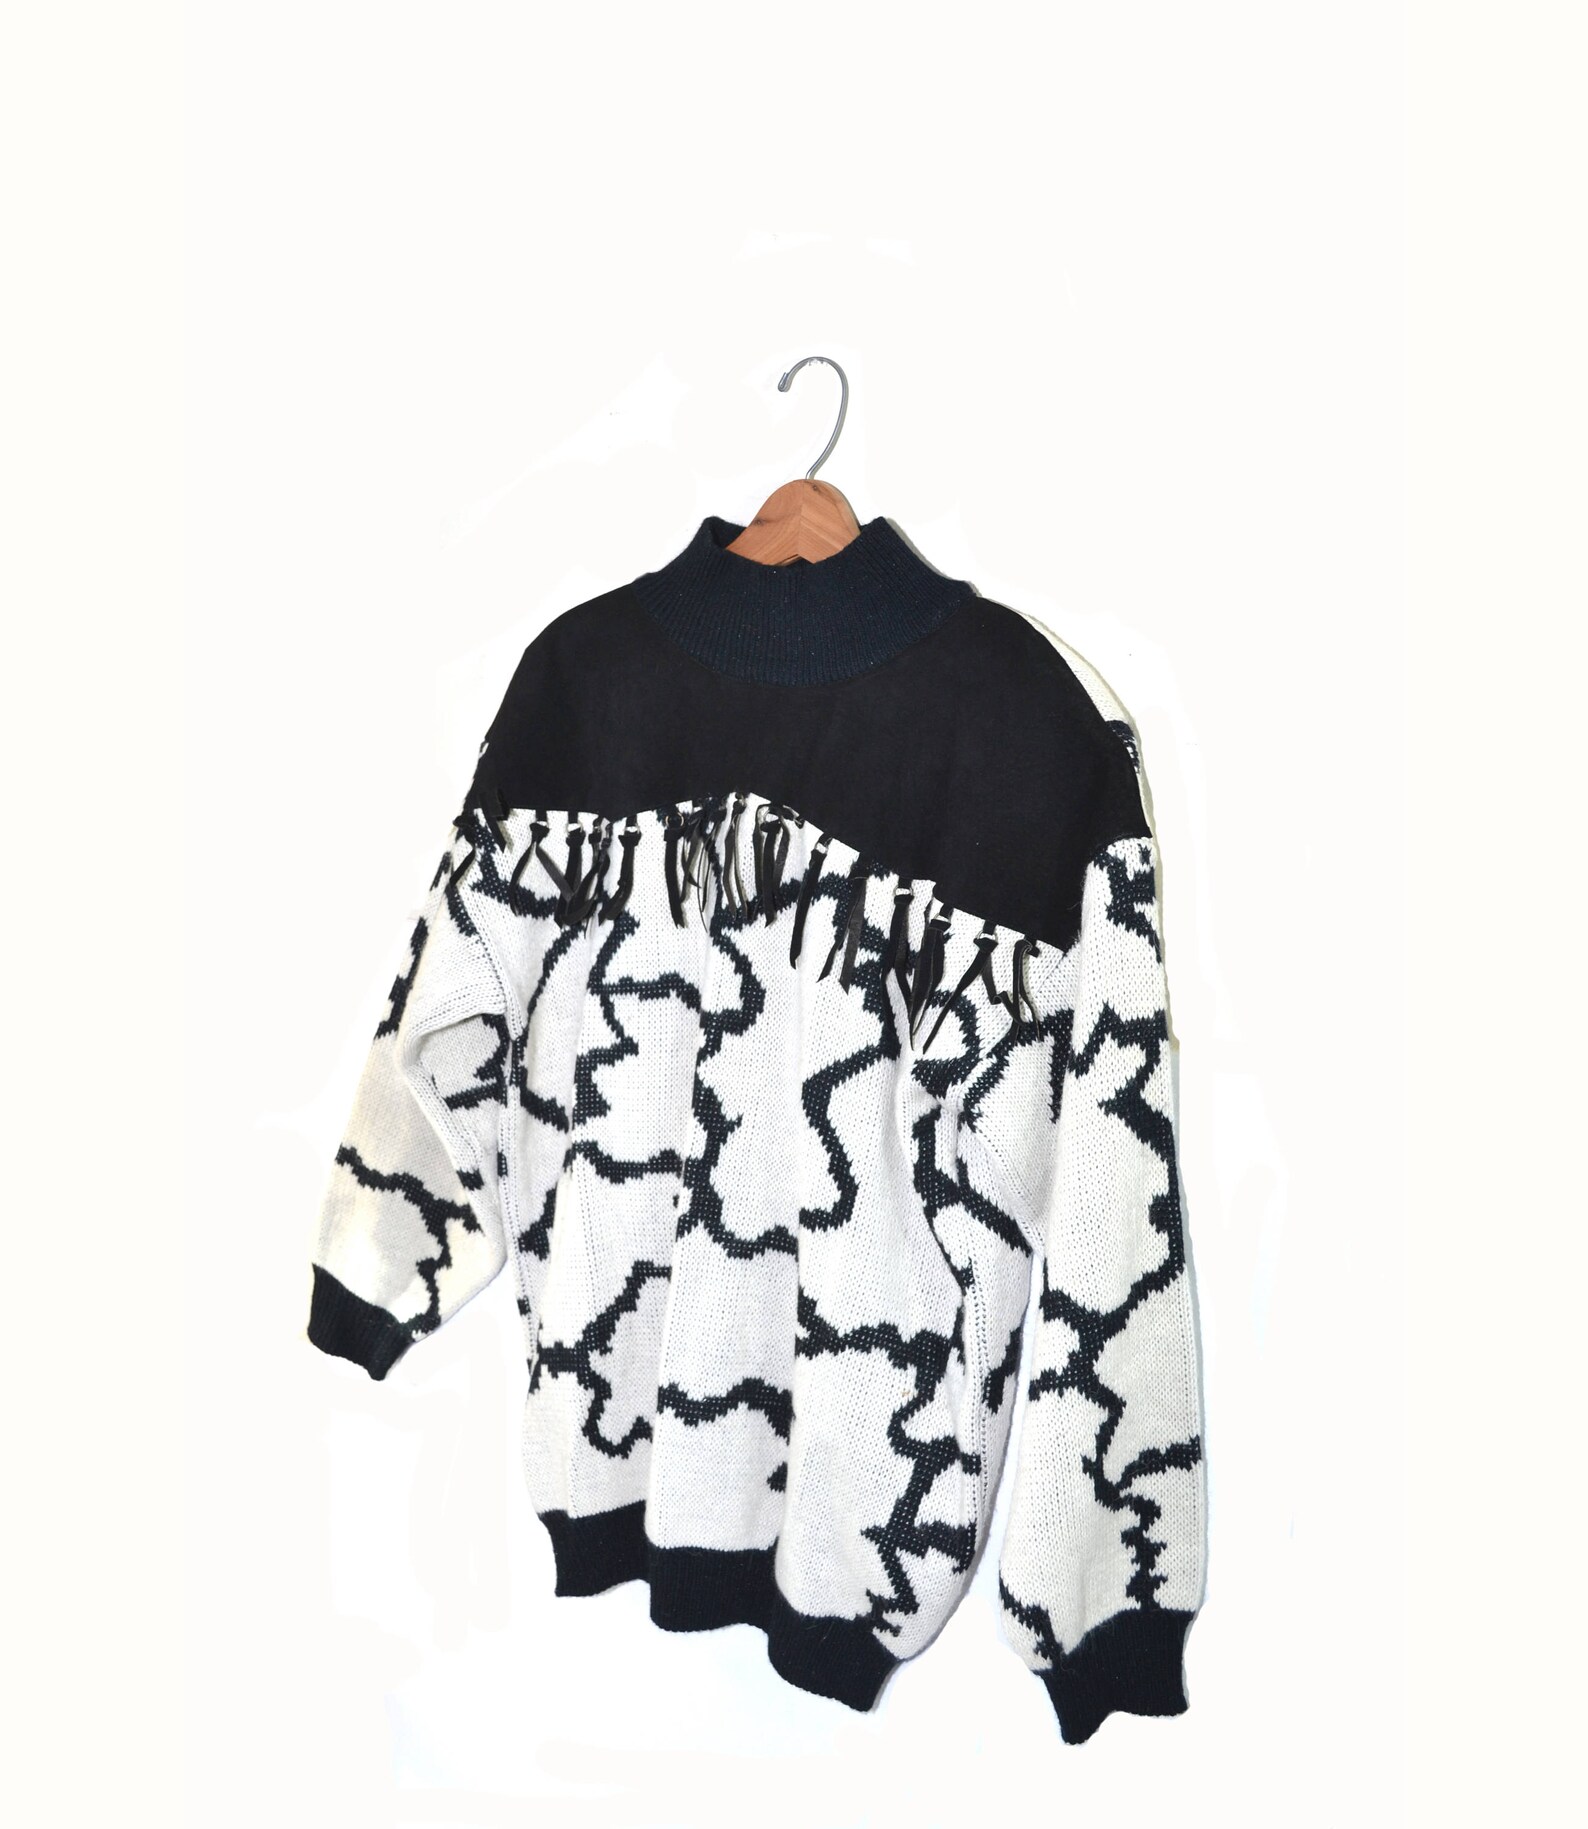 Vintage Southwestern Cow Print Sweater Black and White Sweater - Etsy